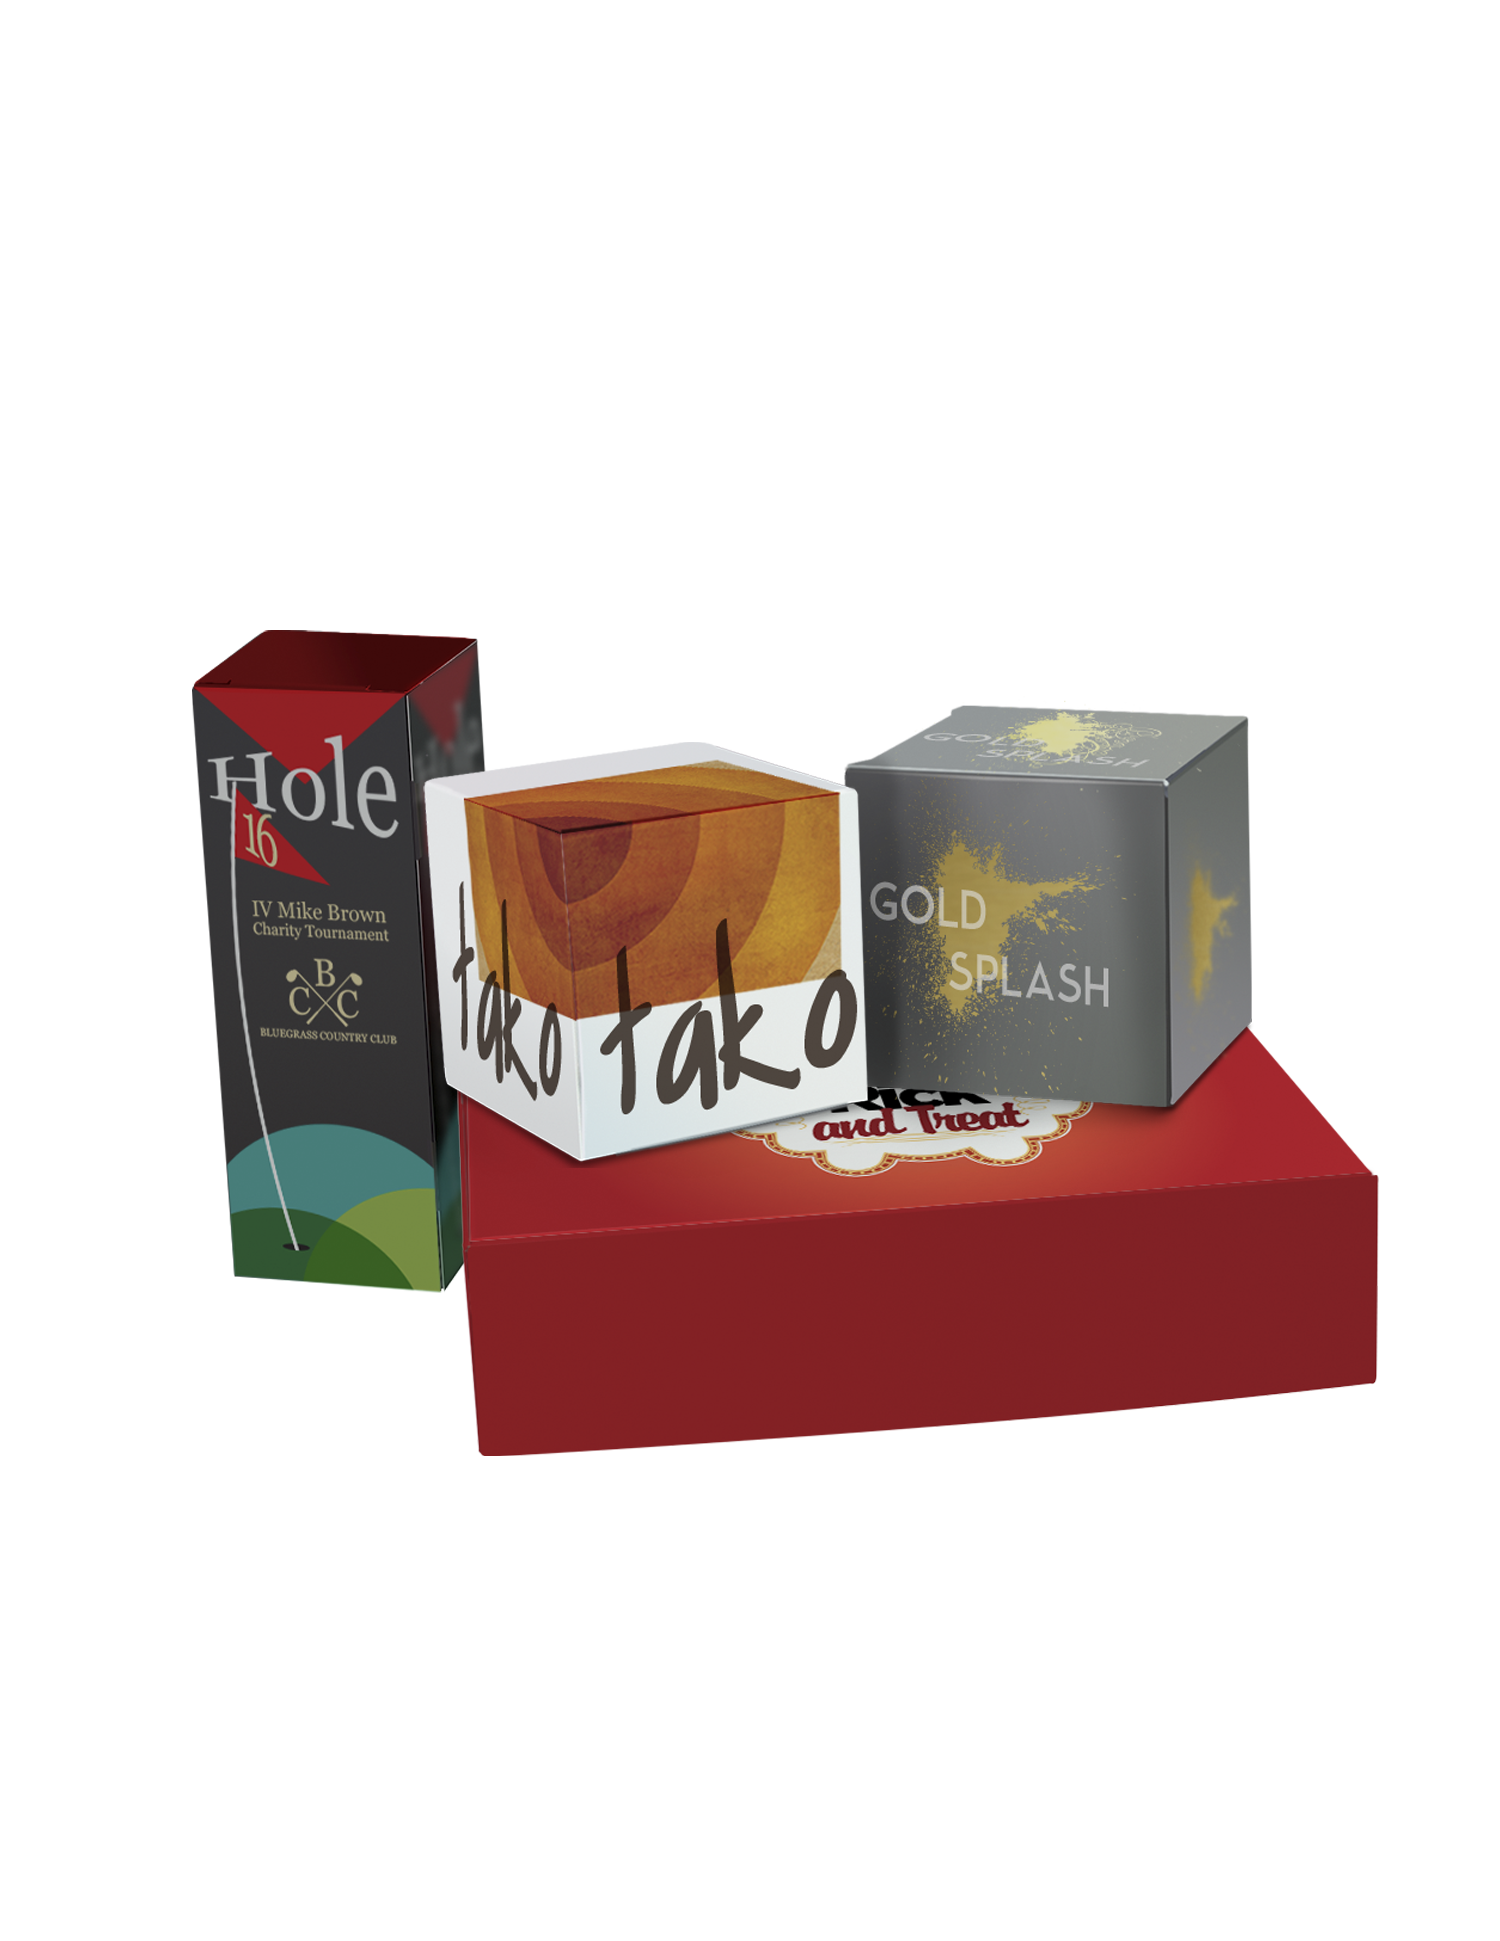 Product Packaging Printing - Full Color Printing Services - Roseville Printing California